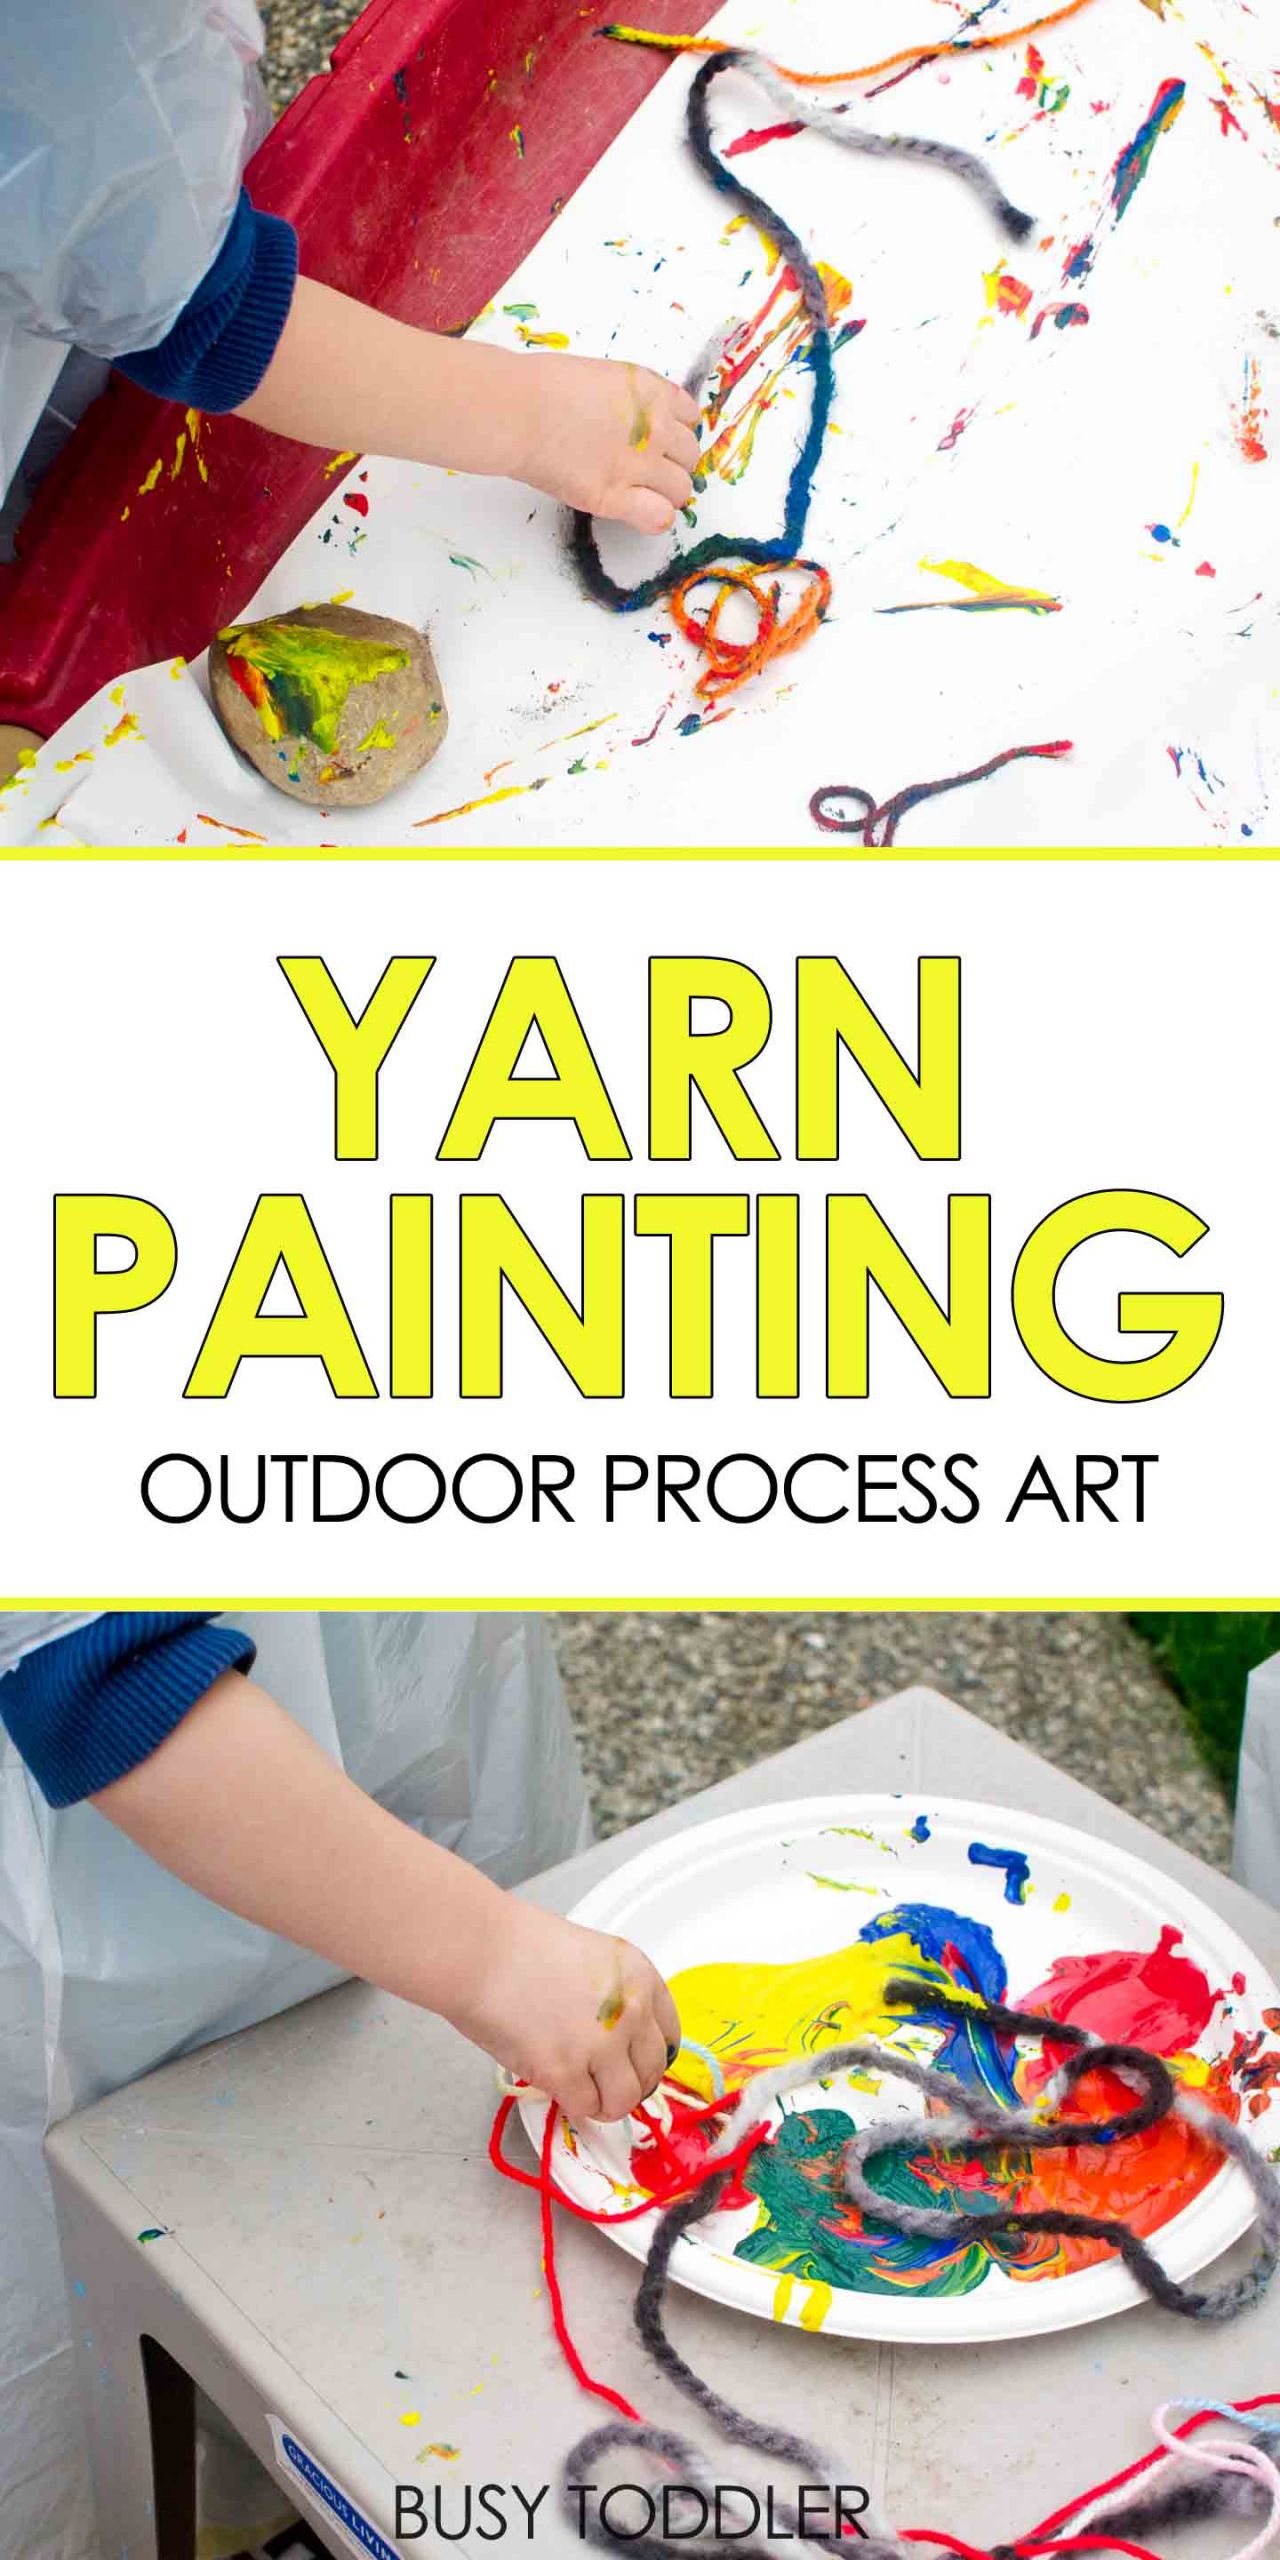 Summer Preschool Art Projects
 Yarn Painting Outdoor Process Art Busy Toddler